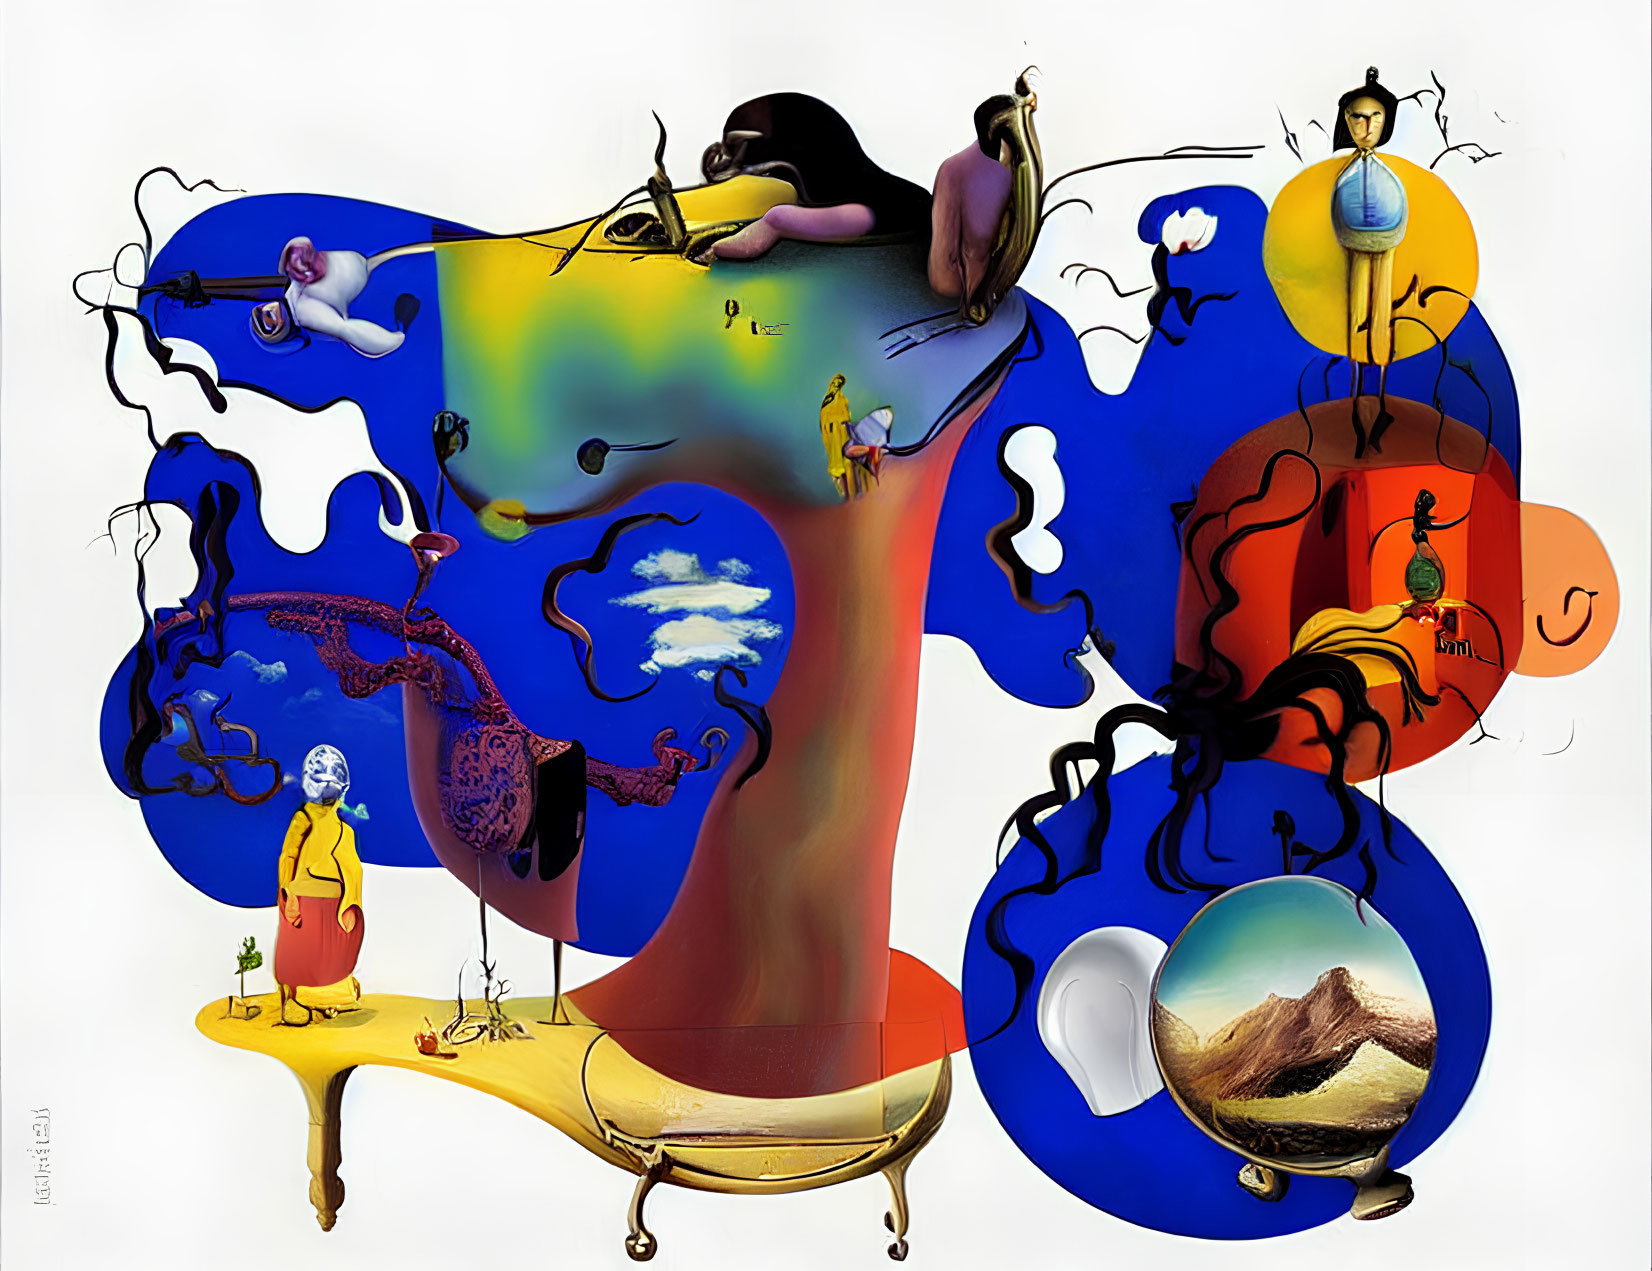 Abstract surrealistic artwork featuring human figures, landscapes, and vibrant colors